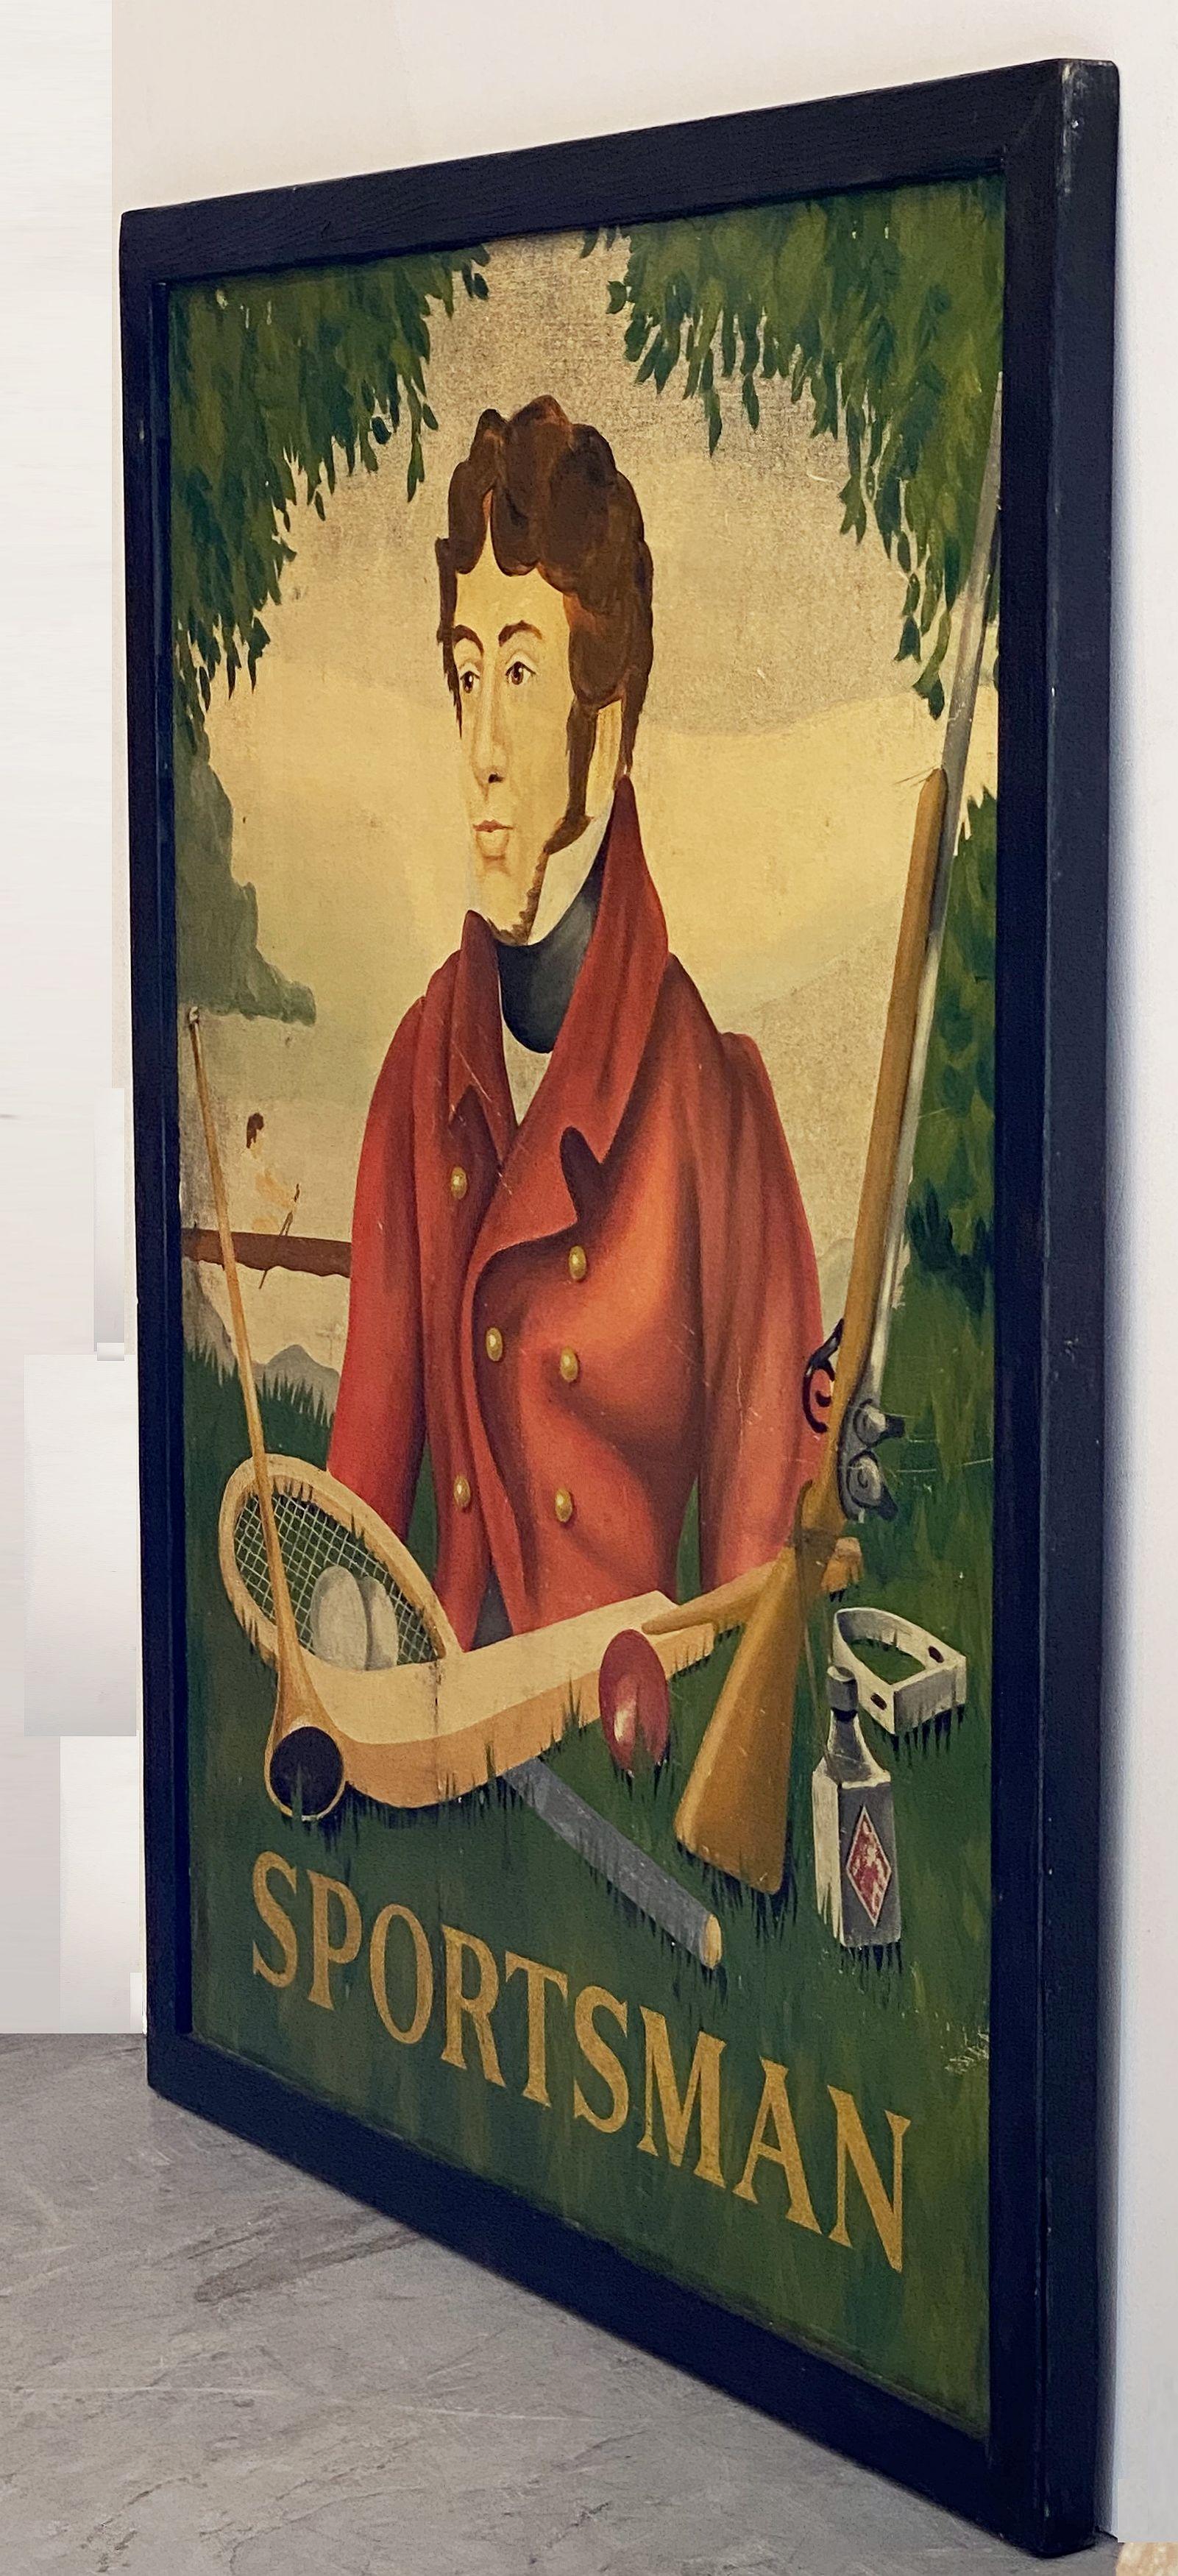 An authentic English pub sign (two-sided) featuring a painting of a Regency era gentleman with representations of British sport traditions such as cricket and tennis, entitled: Sportsman.

A very fine example of vintage advertising artwork and